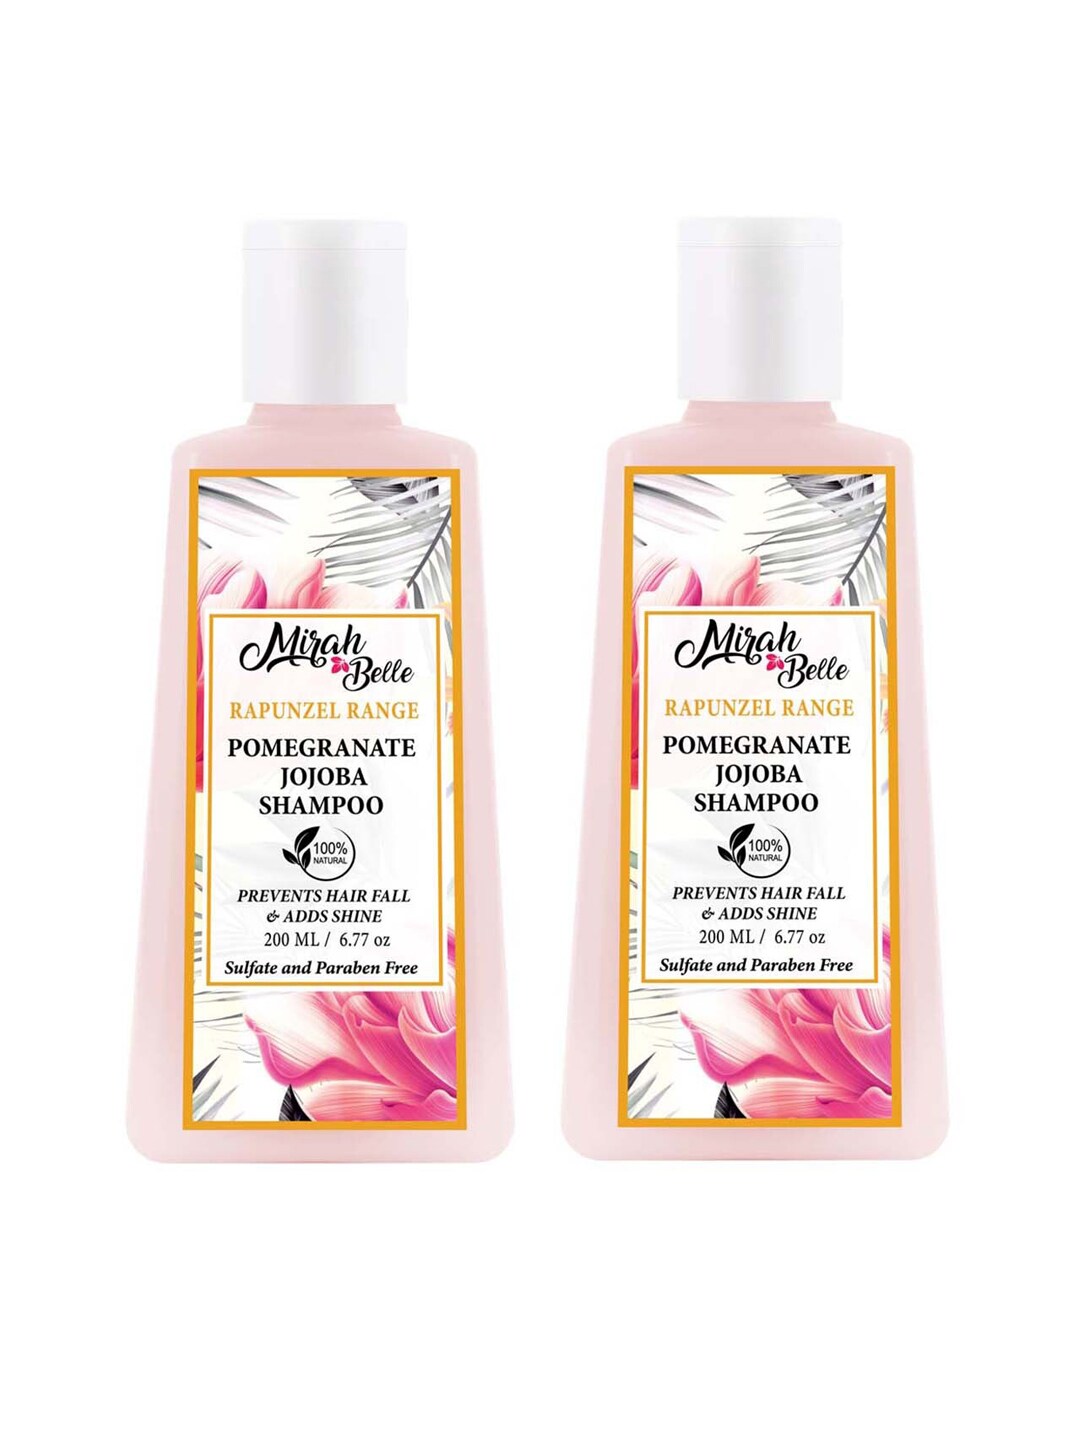 Mirah Belle Pack of 2 Pomegranate and Jojoba New Hair Growth Shampoo 200 ml (each) Price in India